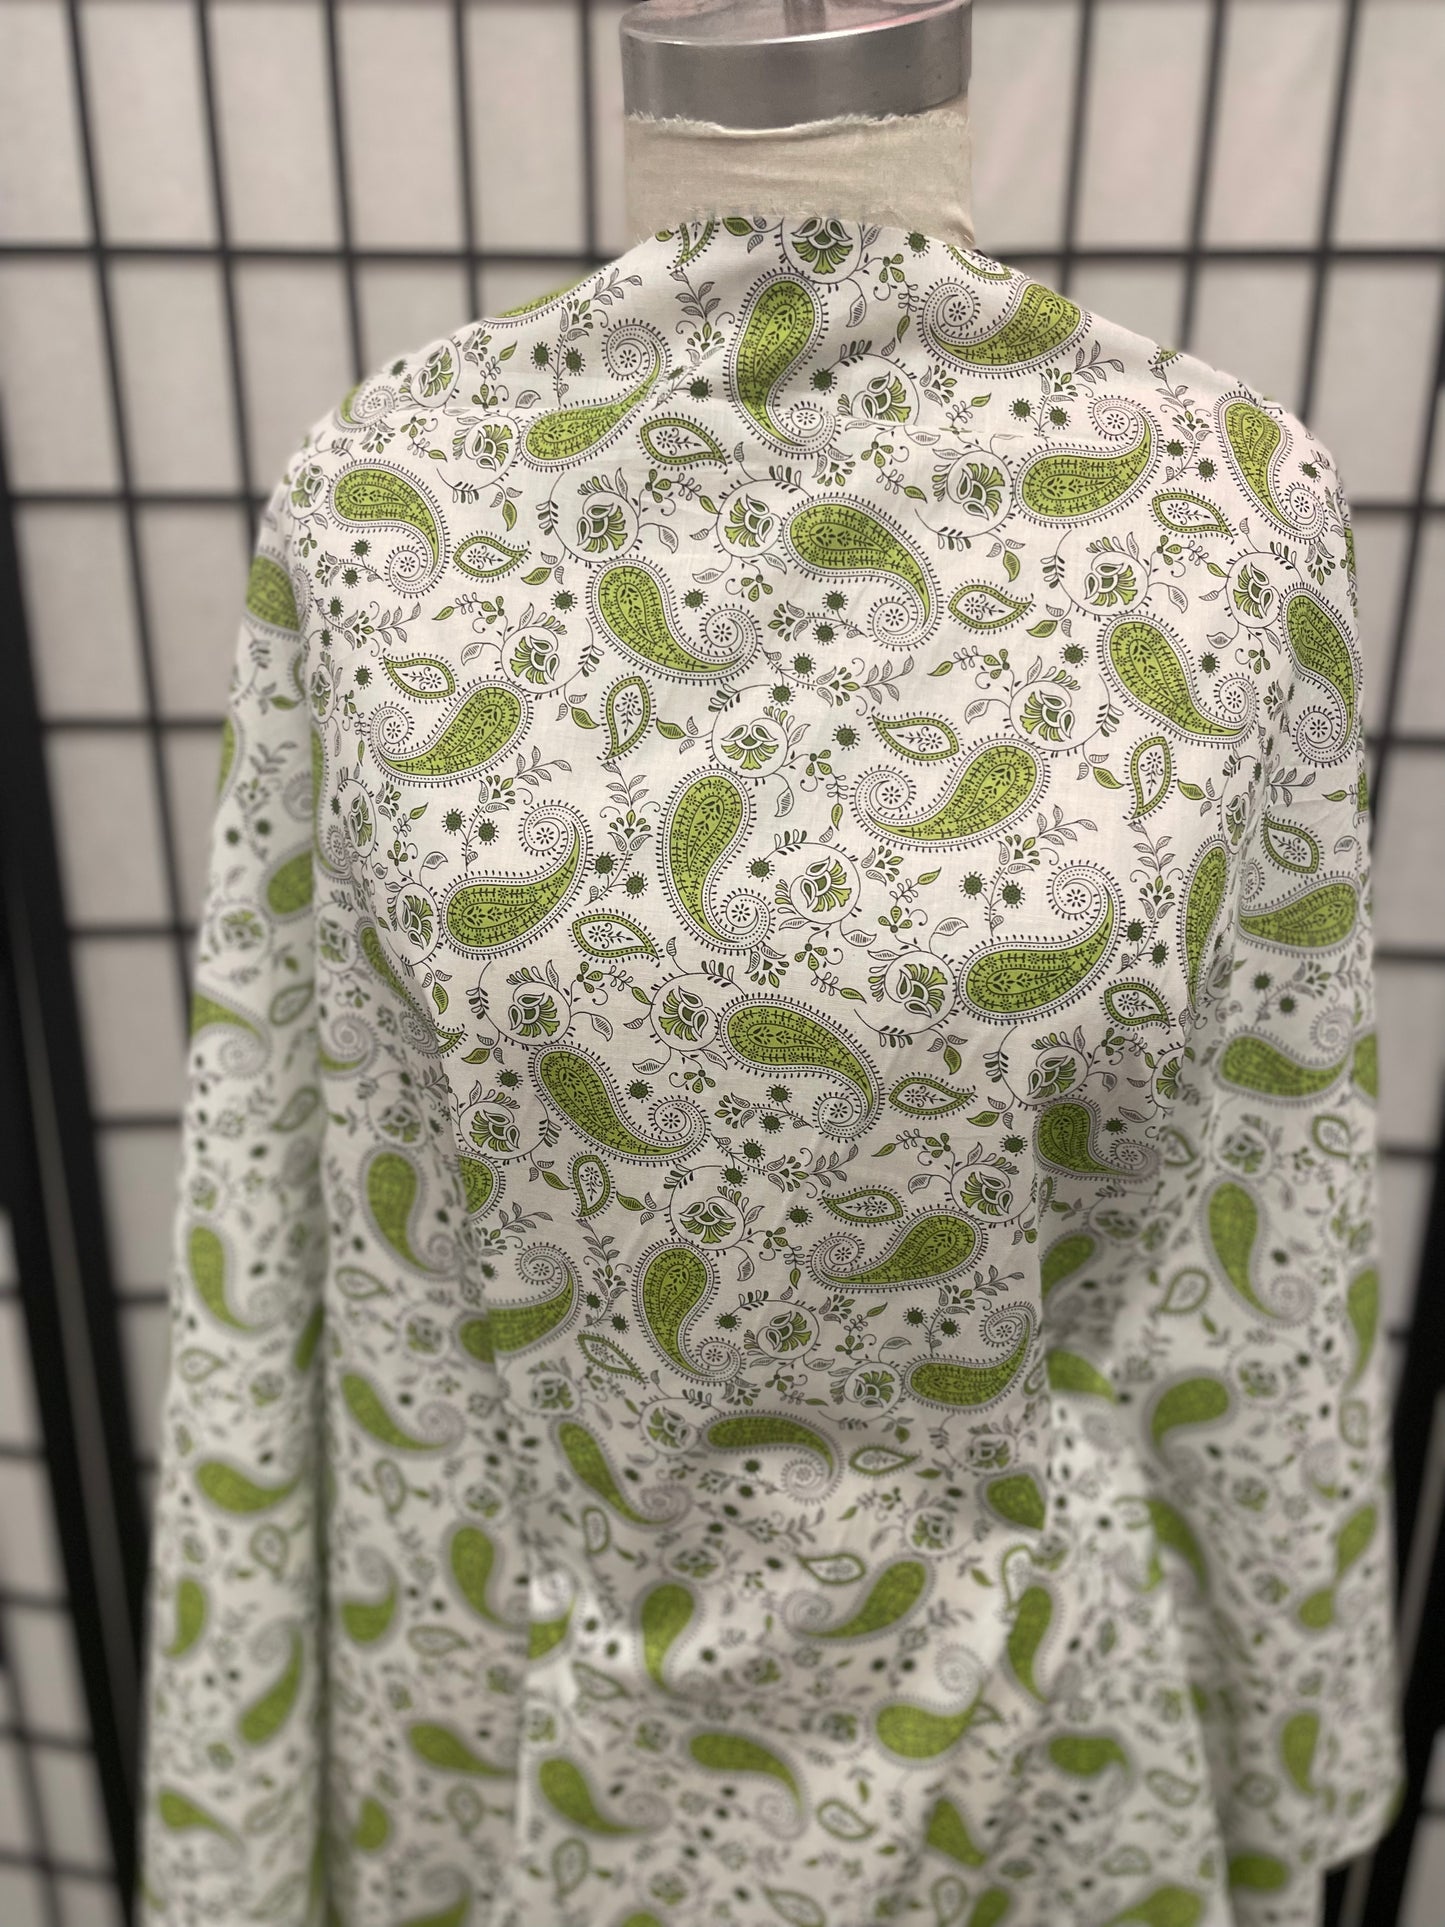 Paisley Printed Lightweight Cotton - Green & White